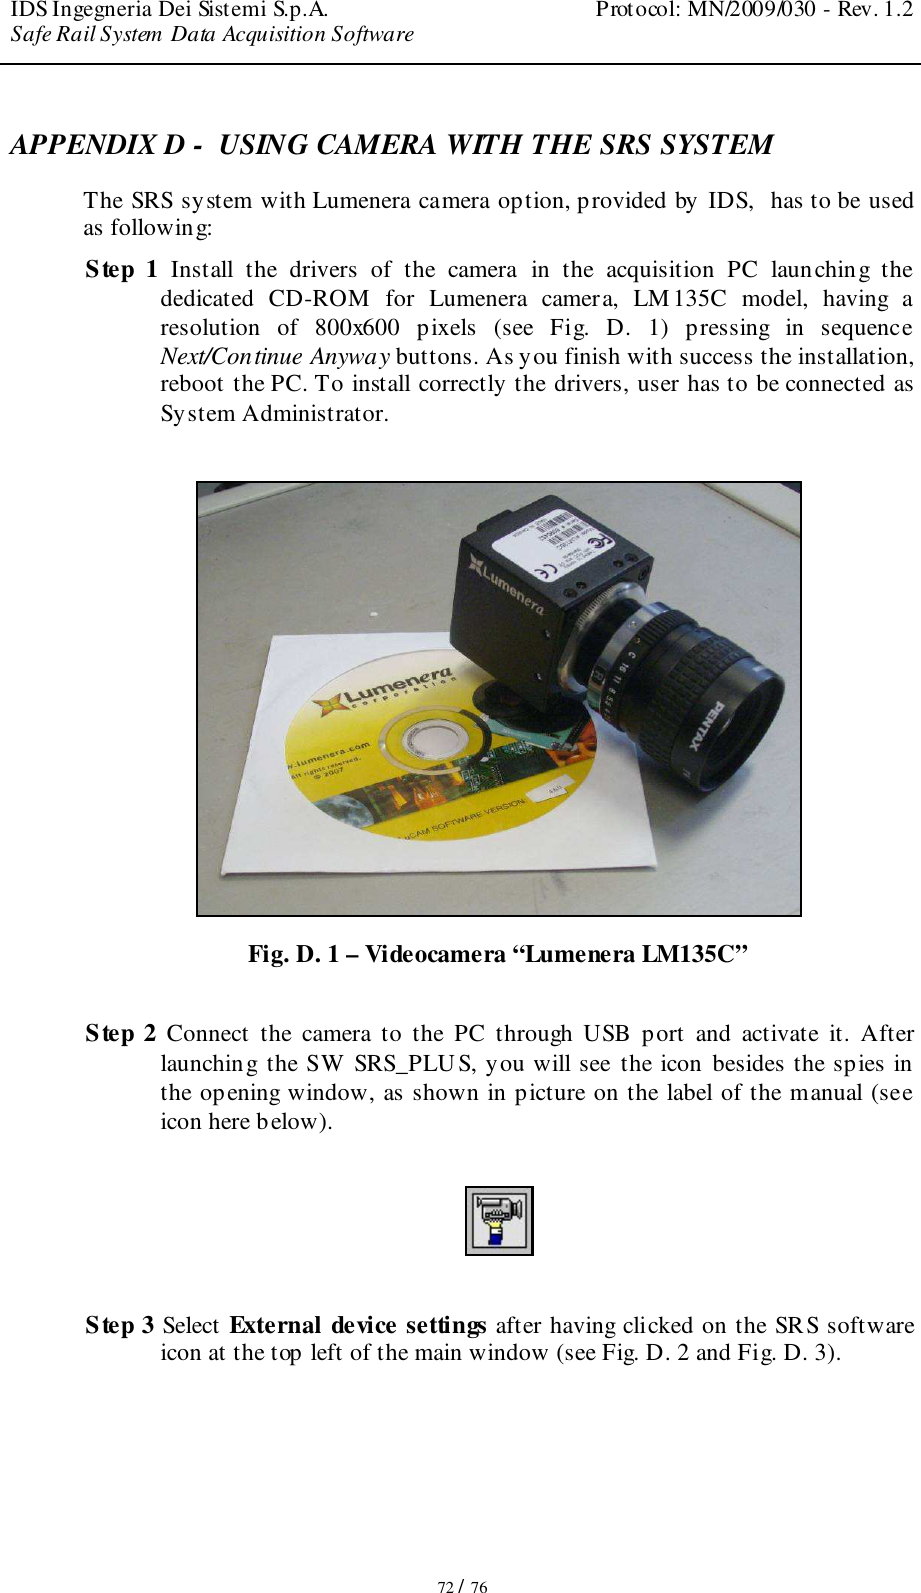 IDS Ingegneria Dei Sistemi S.p.A.  Protocol: MN/2009/030 - Rev. 1.2 Safe Rail System Data Acquisition Software   72 / 76 APPENDIX D -  USING CAMERA WITH THE SRS SYSTEM  The SRS system with Lumenera camera option, provided by IDS,  has to be used as following: Step  1 Install  the  drivers  of  the  camera  in  the  acquisition  PC  launching  the dedicated  CD-ROM  for  Lumenera  camera,  LM 135C  model,  having  a resolution  of  800x600  pixels  (see  Fig.  D.  1)  pressing  in  sequence Next/Continue Anyway buttons. As you finish with success the installation, reboot the PC. To install correctly the drivers, user has to be connected as System Administrator.    Fig. D. 1 – Videocamera “Lumenera LM135C”  Step  2 Connect  the  camera  to  the  PC  through  USB  port  and  activate  it.  After launching the SW  SRS_PLUS, you will see the icon besides the spies in the opening window, as shown in picture on the label of the manual (see icon here below).    Step 3 Select External device settings after having clicked on the SRS software icon at the top left of the main window (see Fig. D. 2 and Fig. D. 3). 